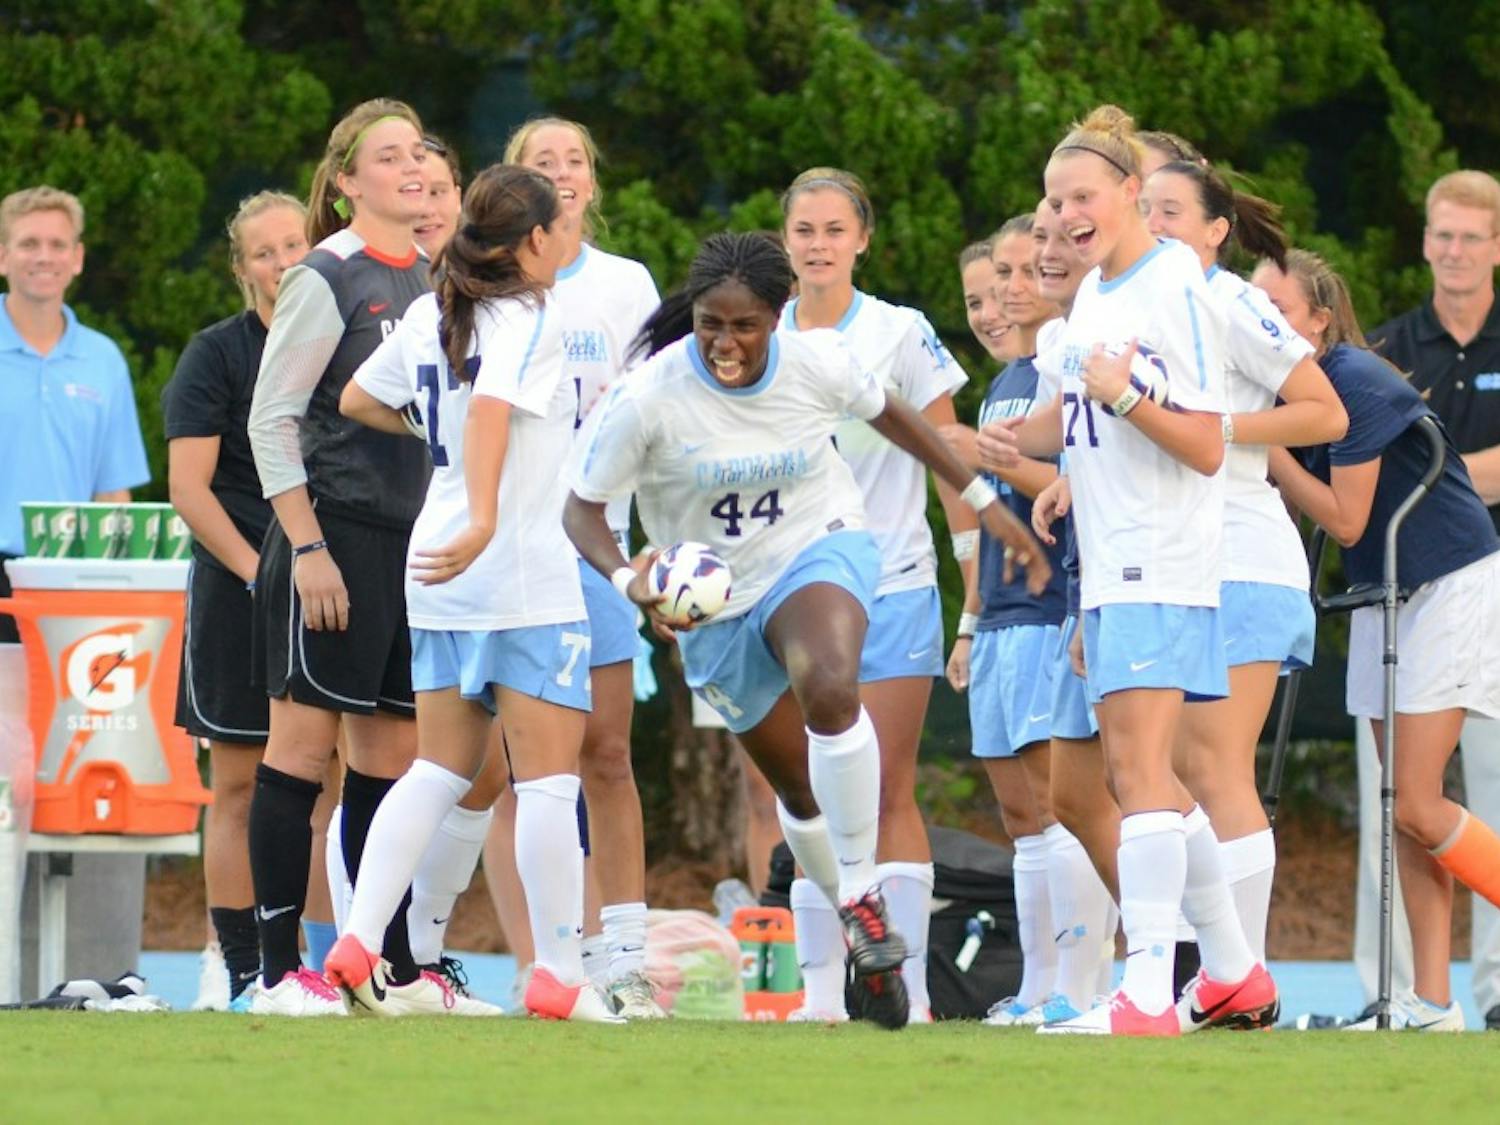 	The UNC Women&#8217;s Soccer team tied Florida 0-0 in their first home soccer game of the season on August 24th, 2012 at Fetzer Field in Chapel Hill, North Carolina.